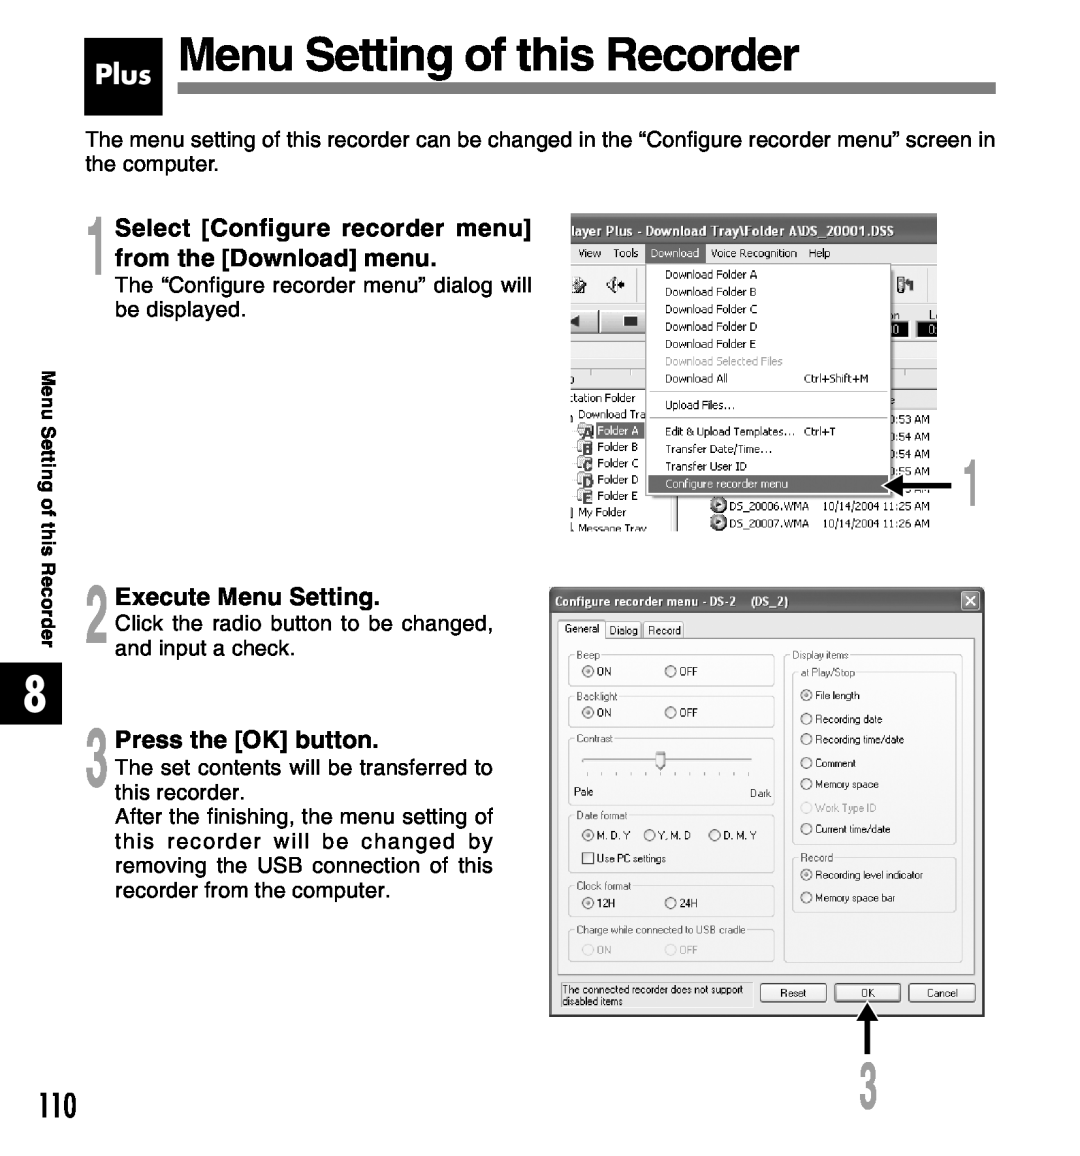 Olympus 2 Plus Menu Setting of this Recorder, 1Select Configure recorder menu from the Download menu, 3Press the OK button 